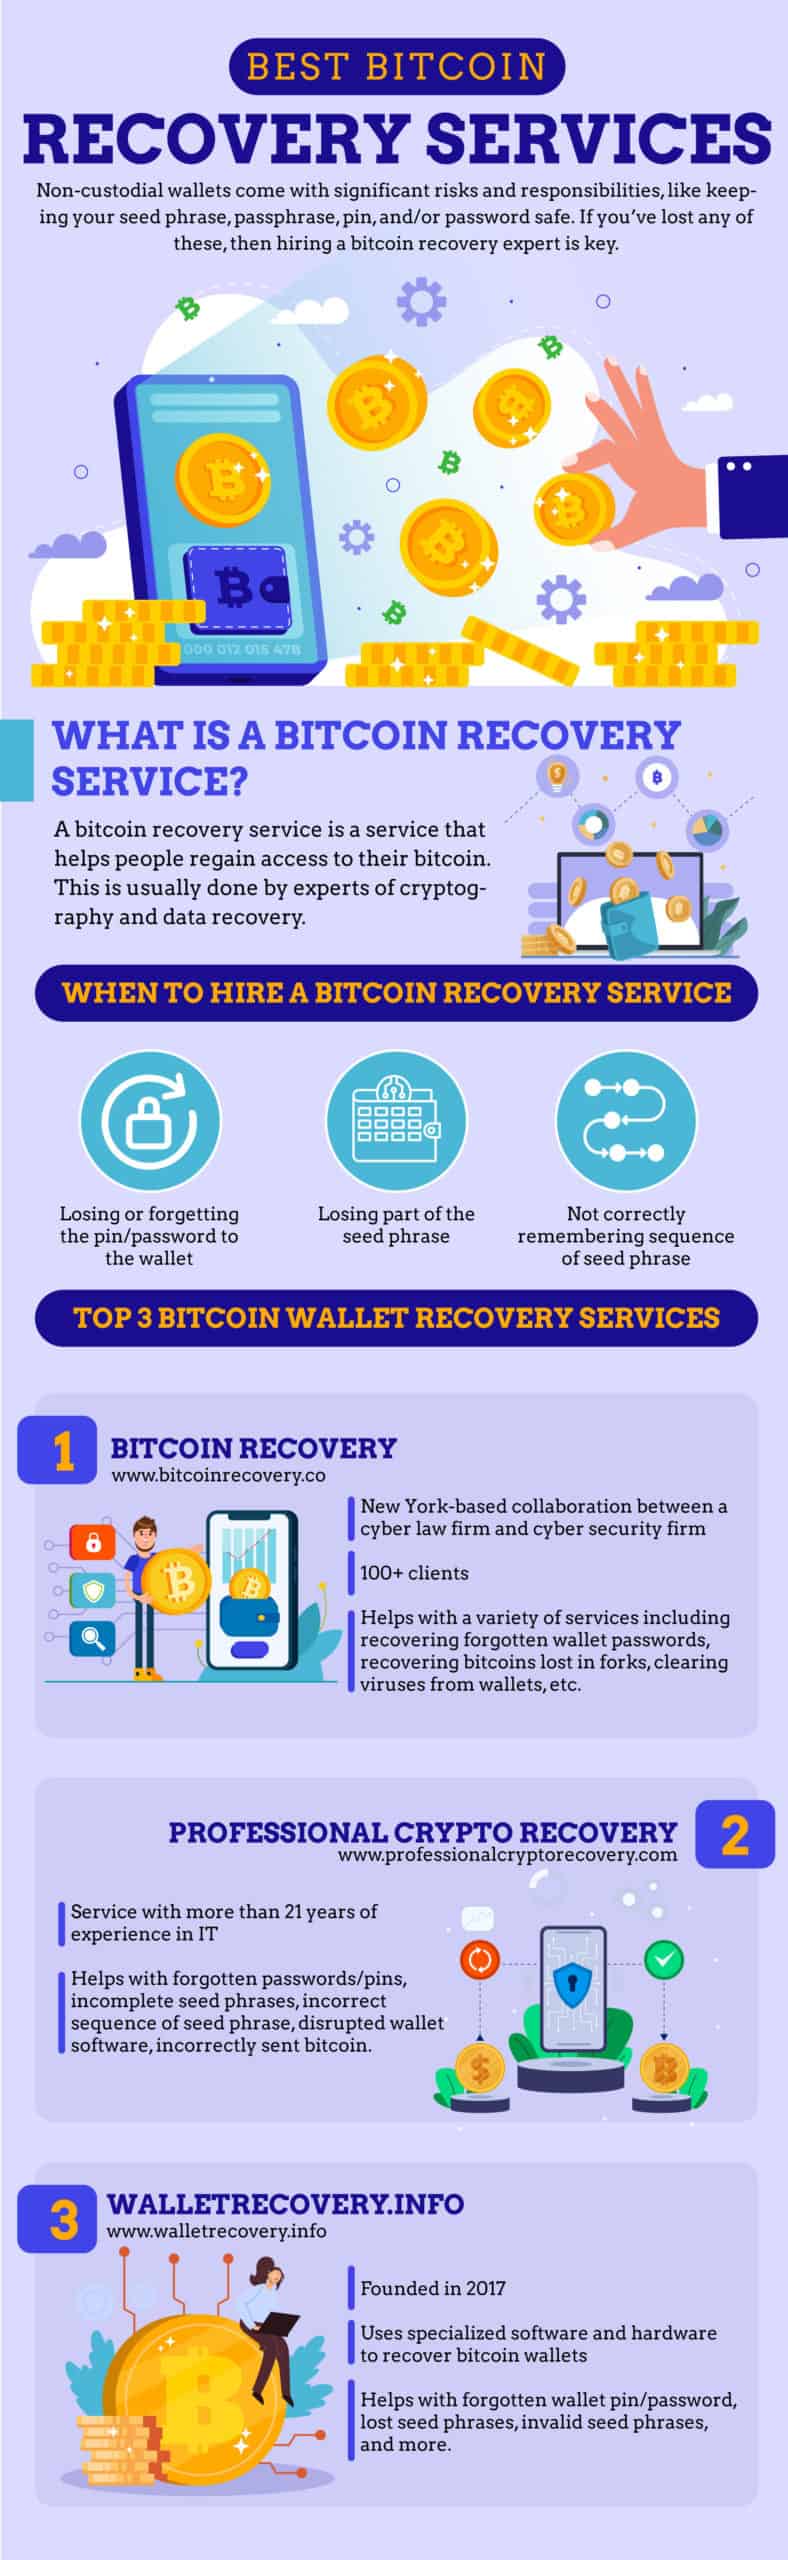 Best Bitcoin Recovery Services Infographic